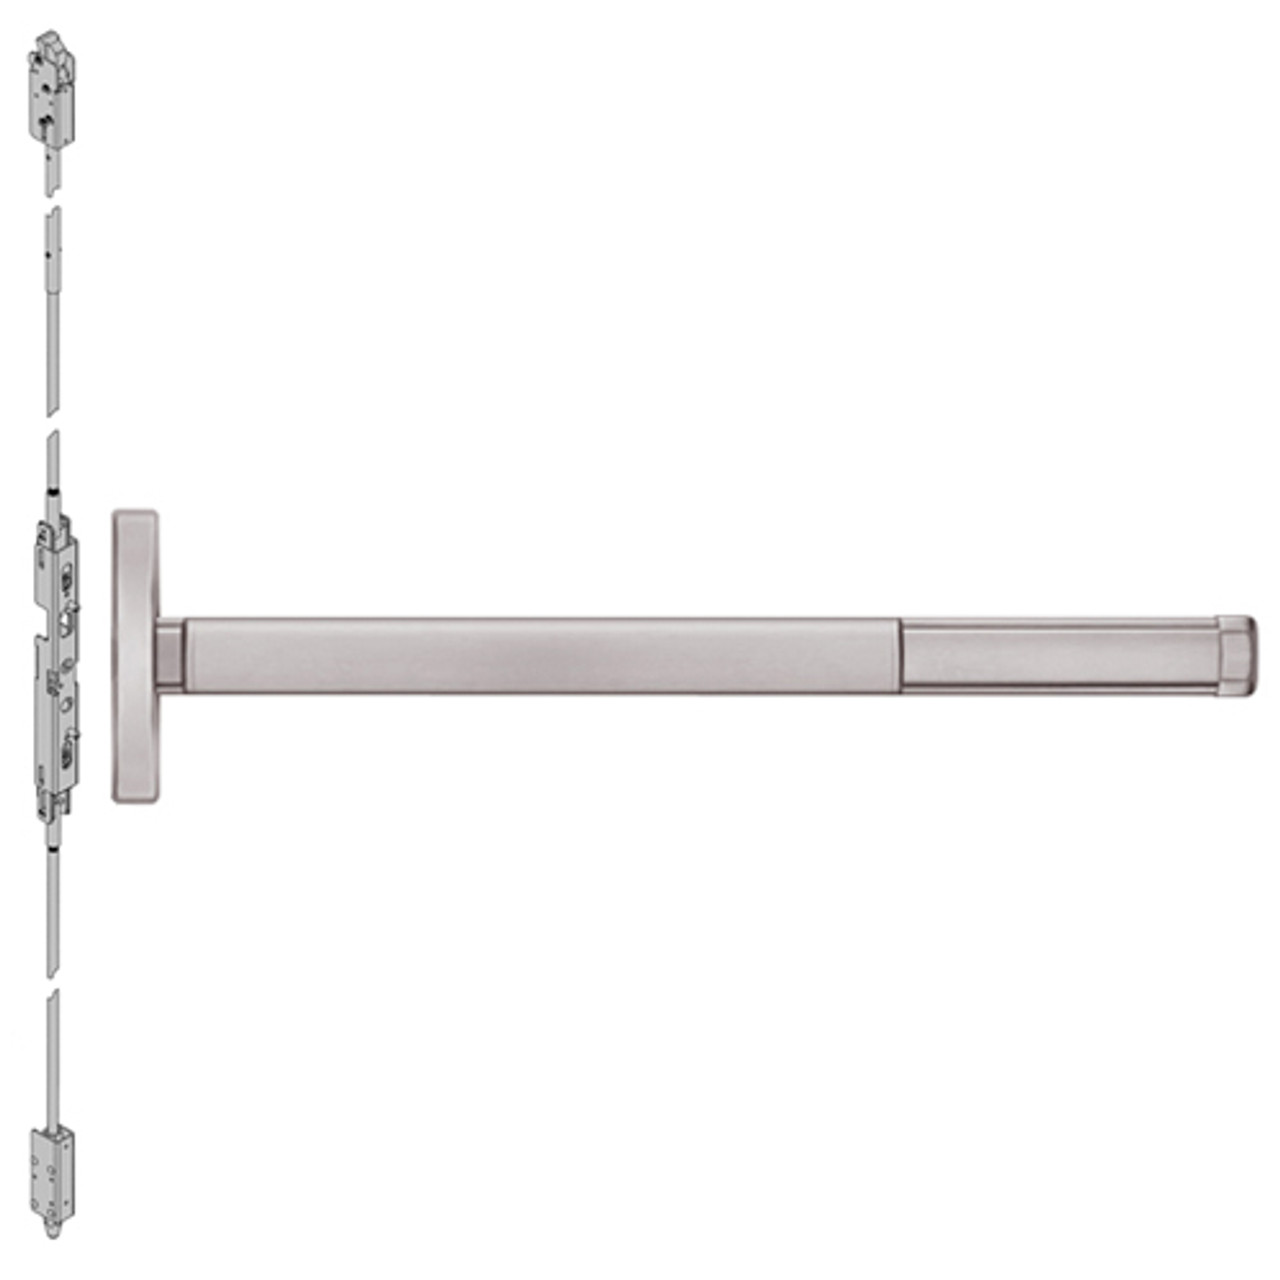 TS2602-628-48 PHI 2600 Series Concealed Vertical Rod Exit Device with Touchbar Monitoring Switch Prepped for Dummy Trim in Satin Aluminum Finish